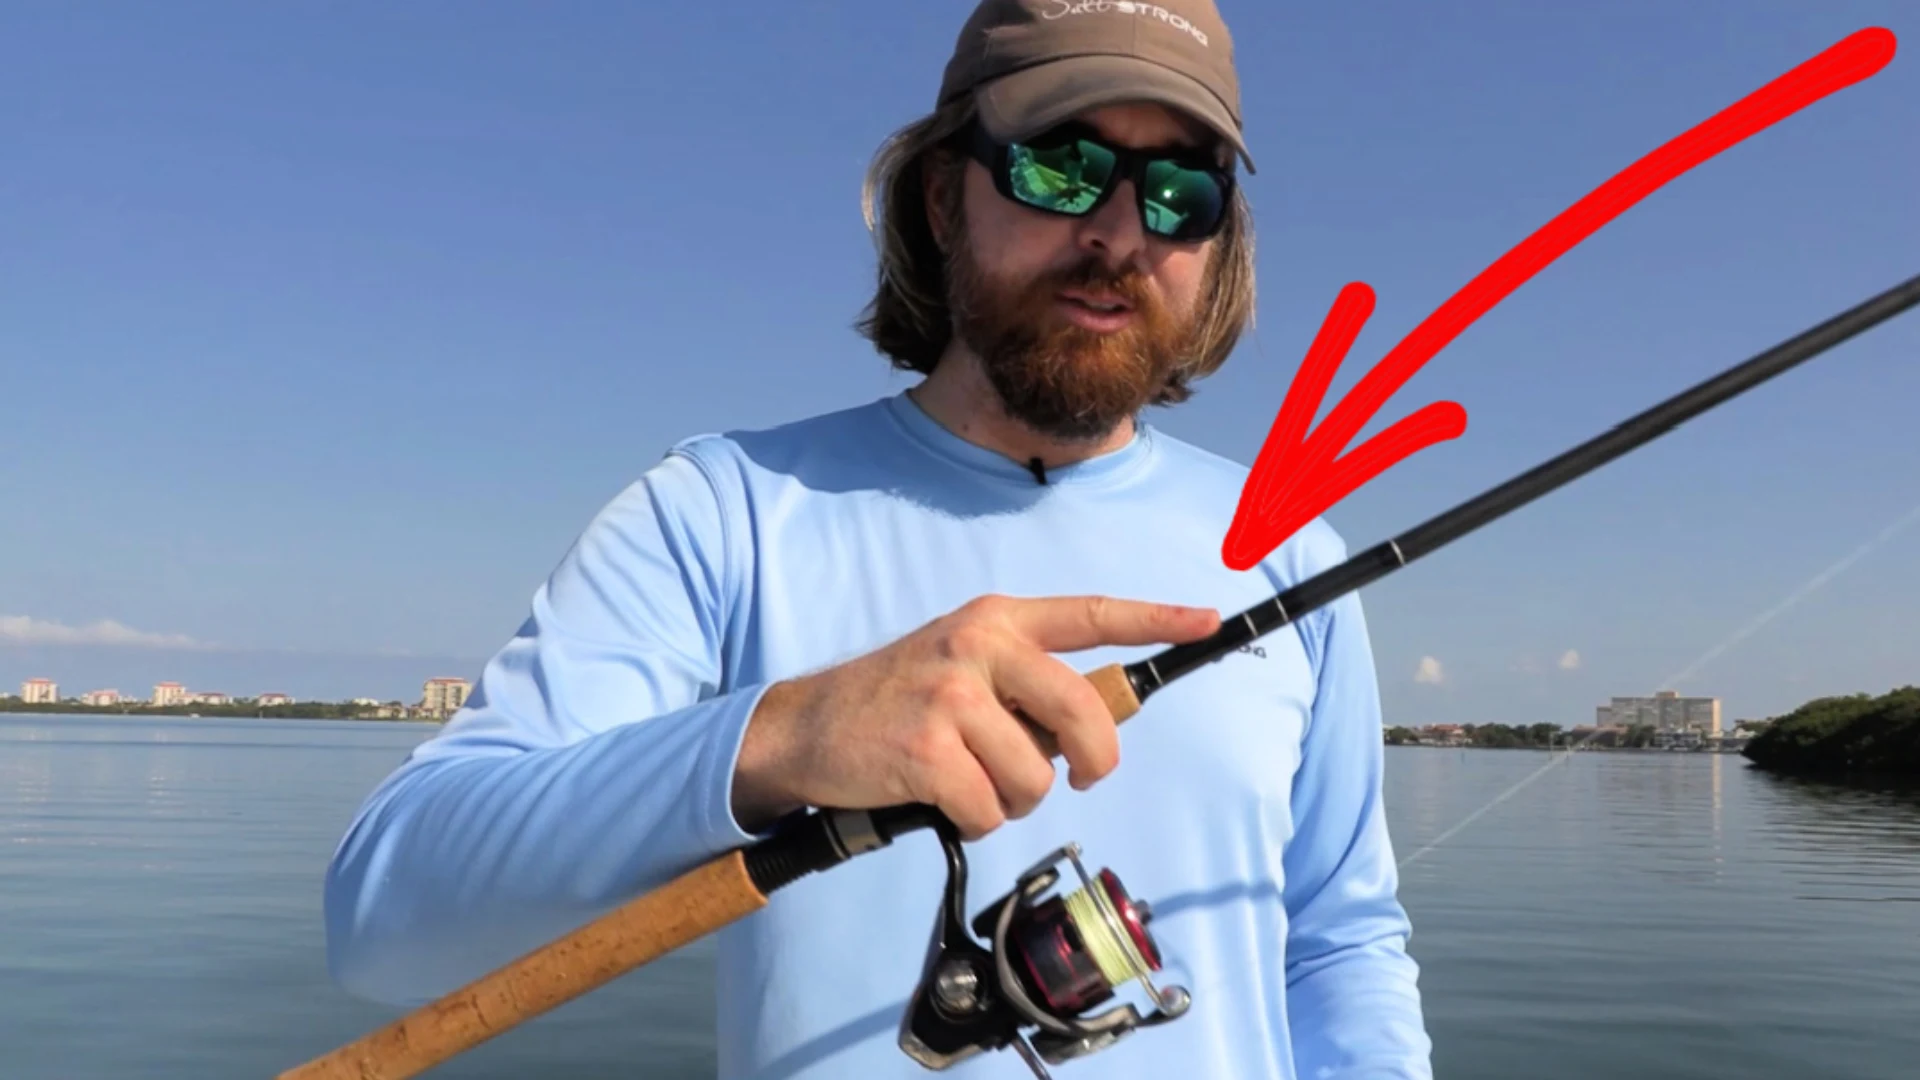 How To Hold The Fishing Rod